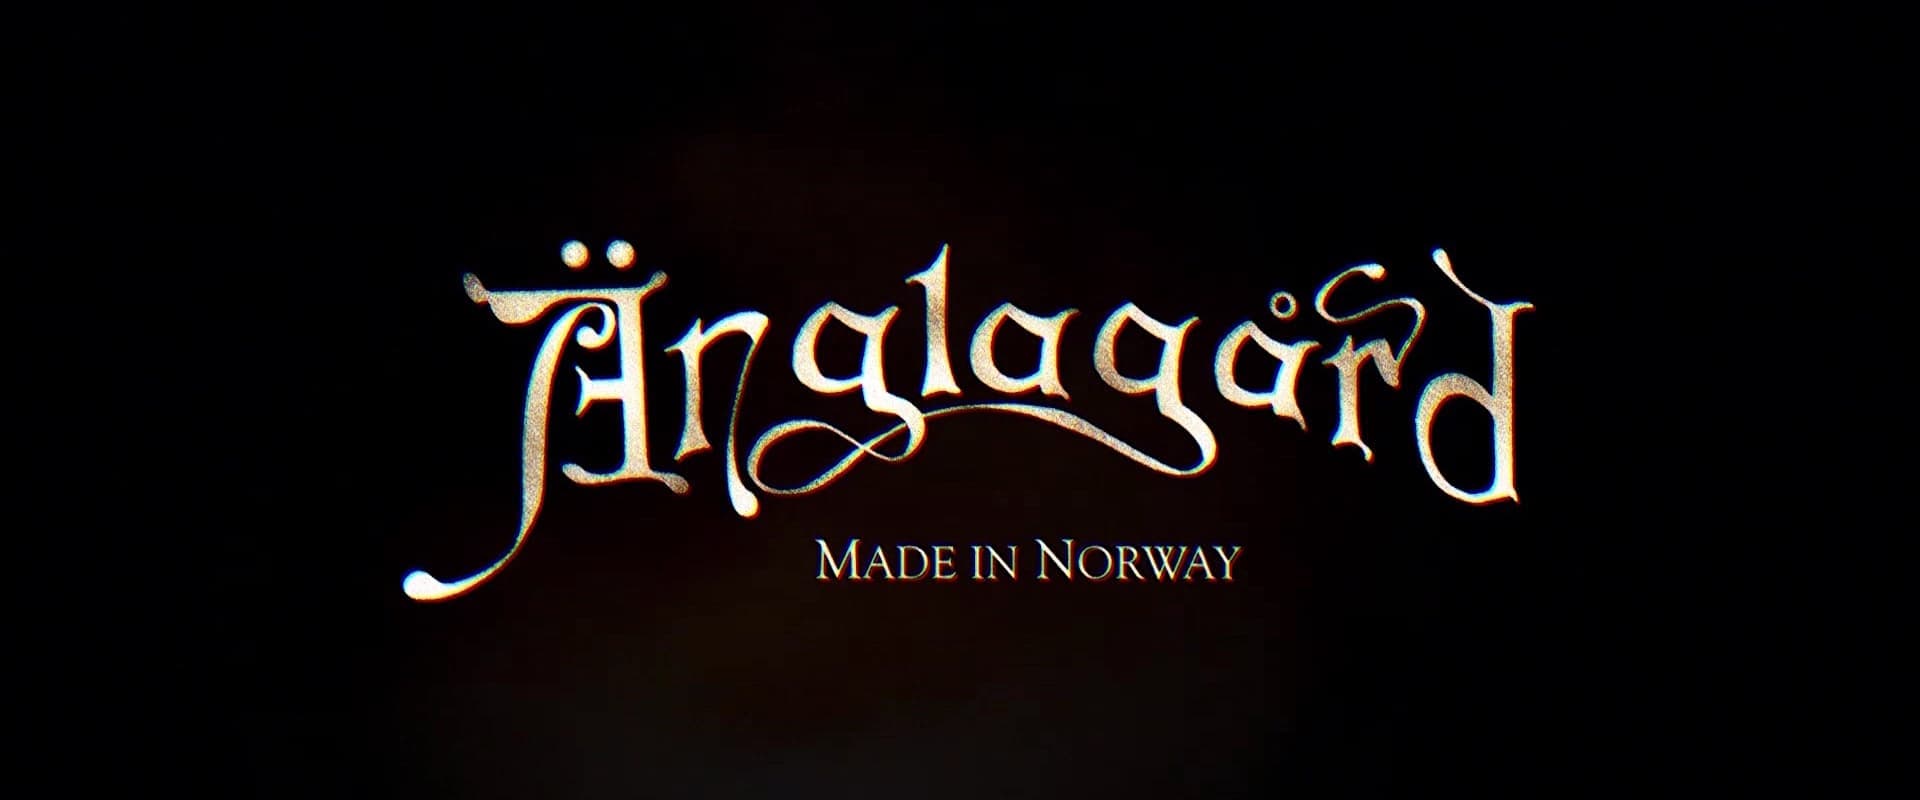 Anglagard - Live: Made in Norway